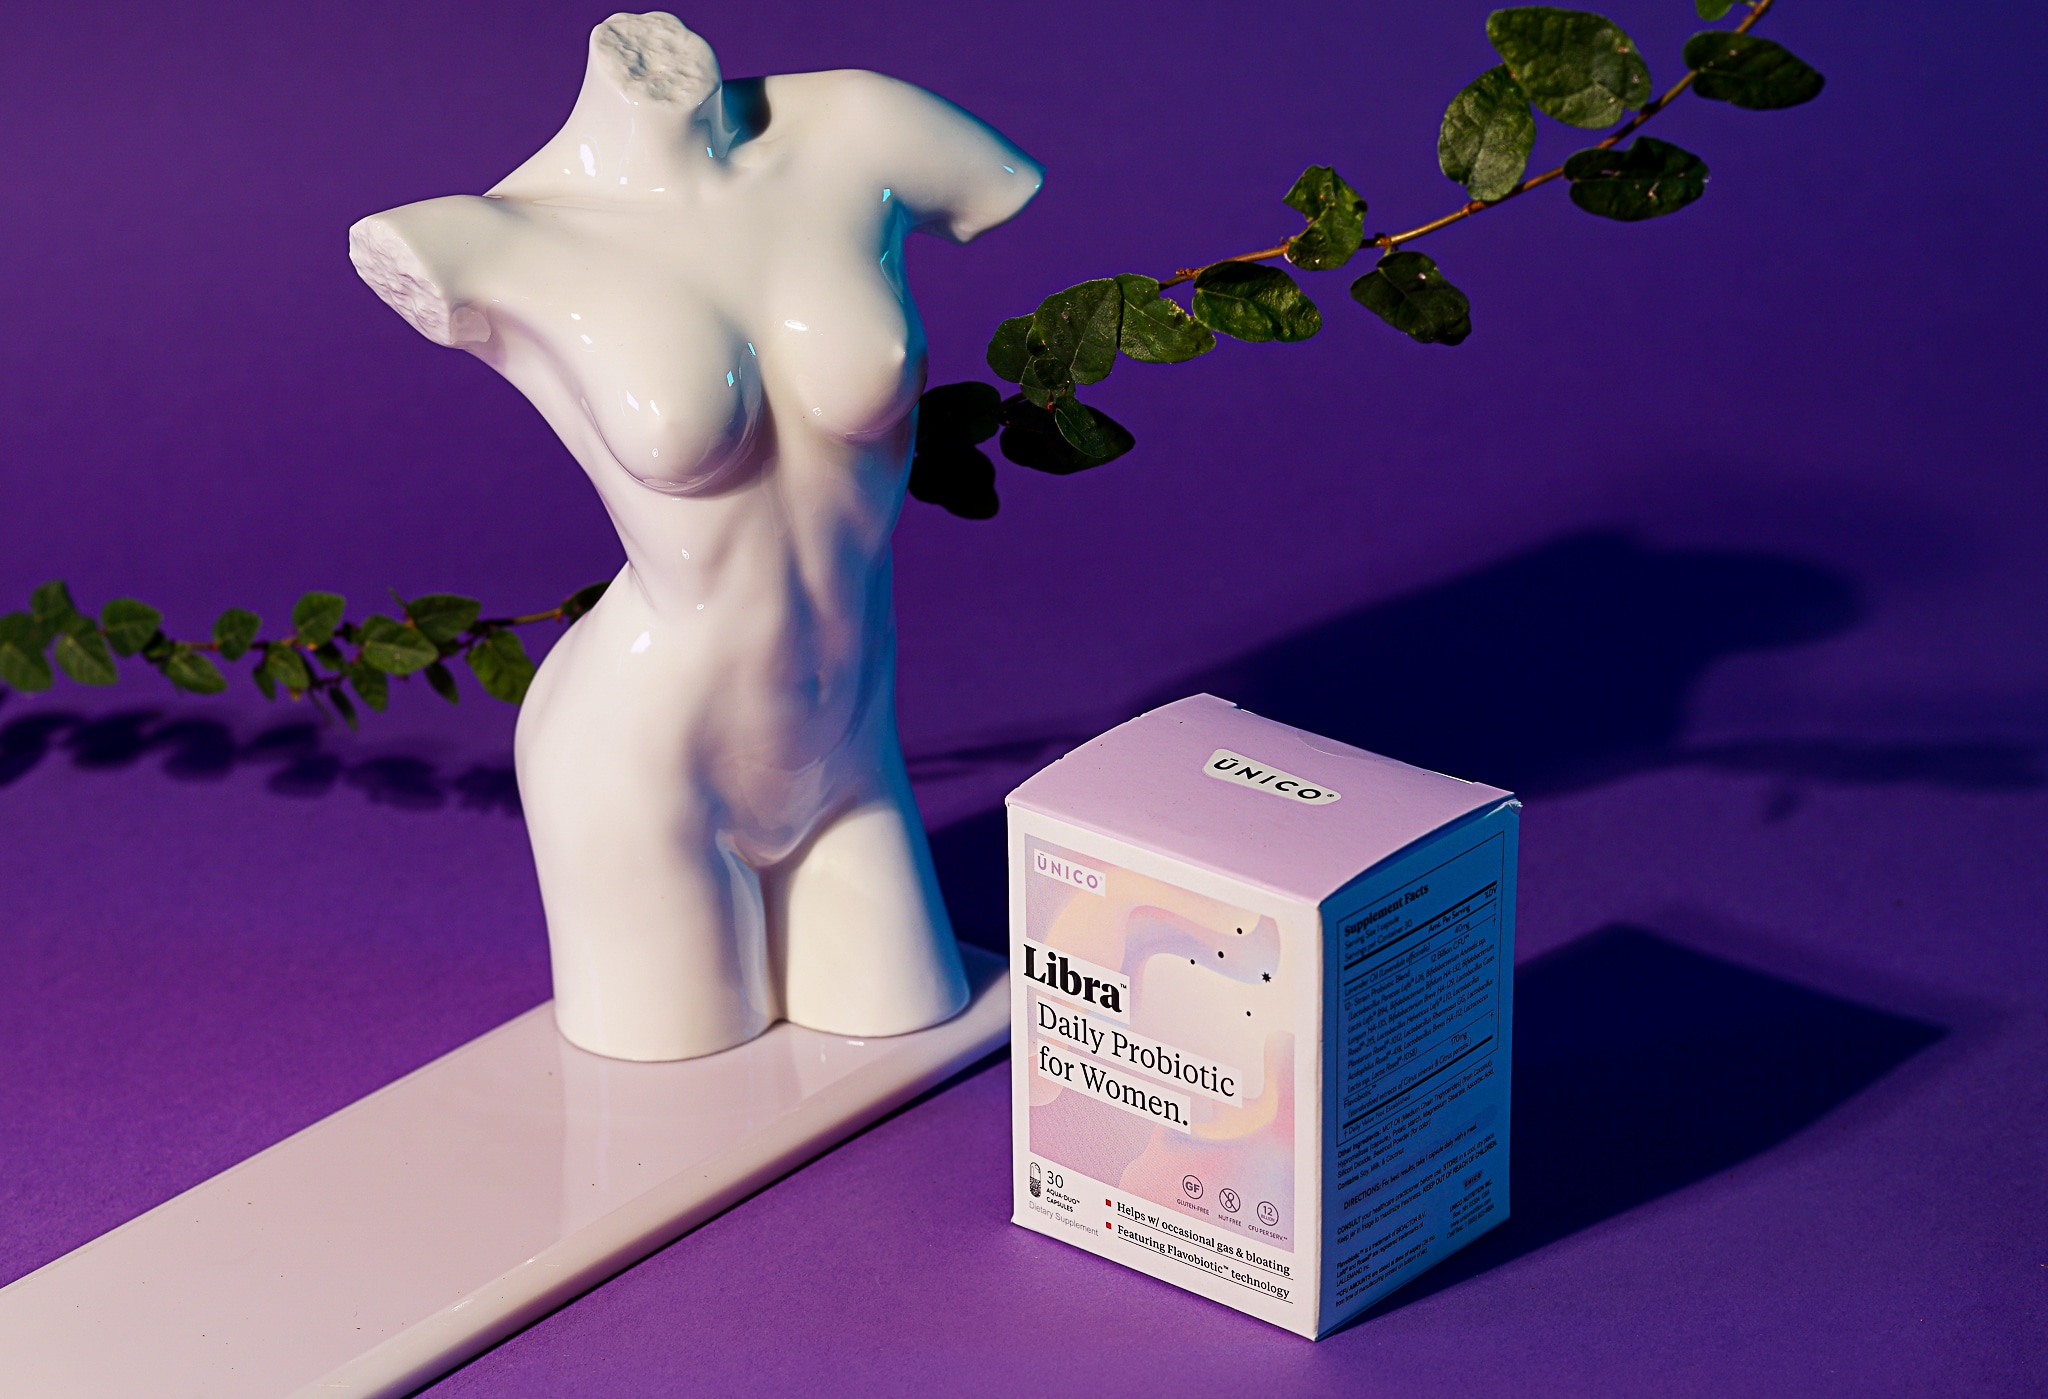 probiotic supplement with female statue and purple background